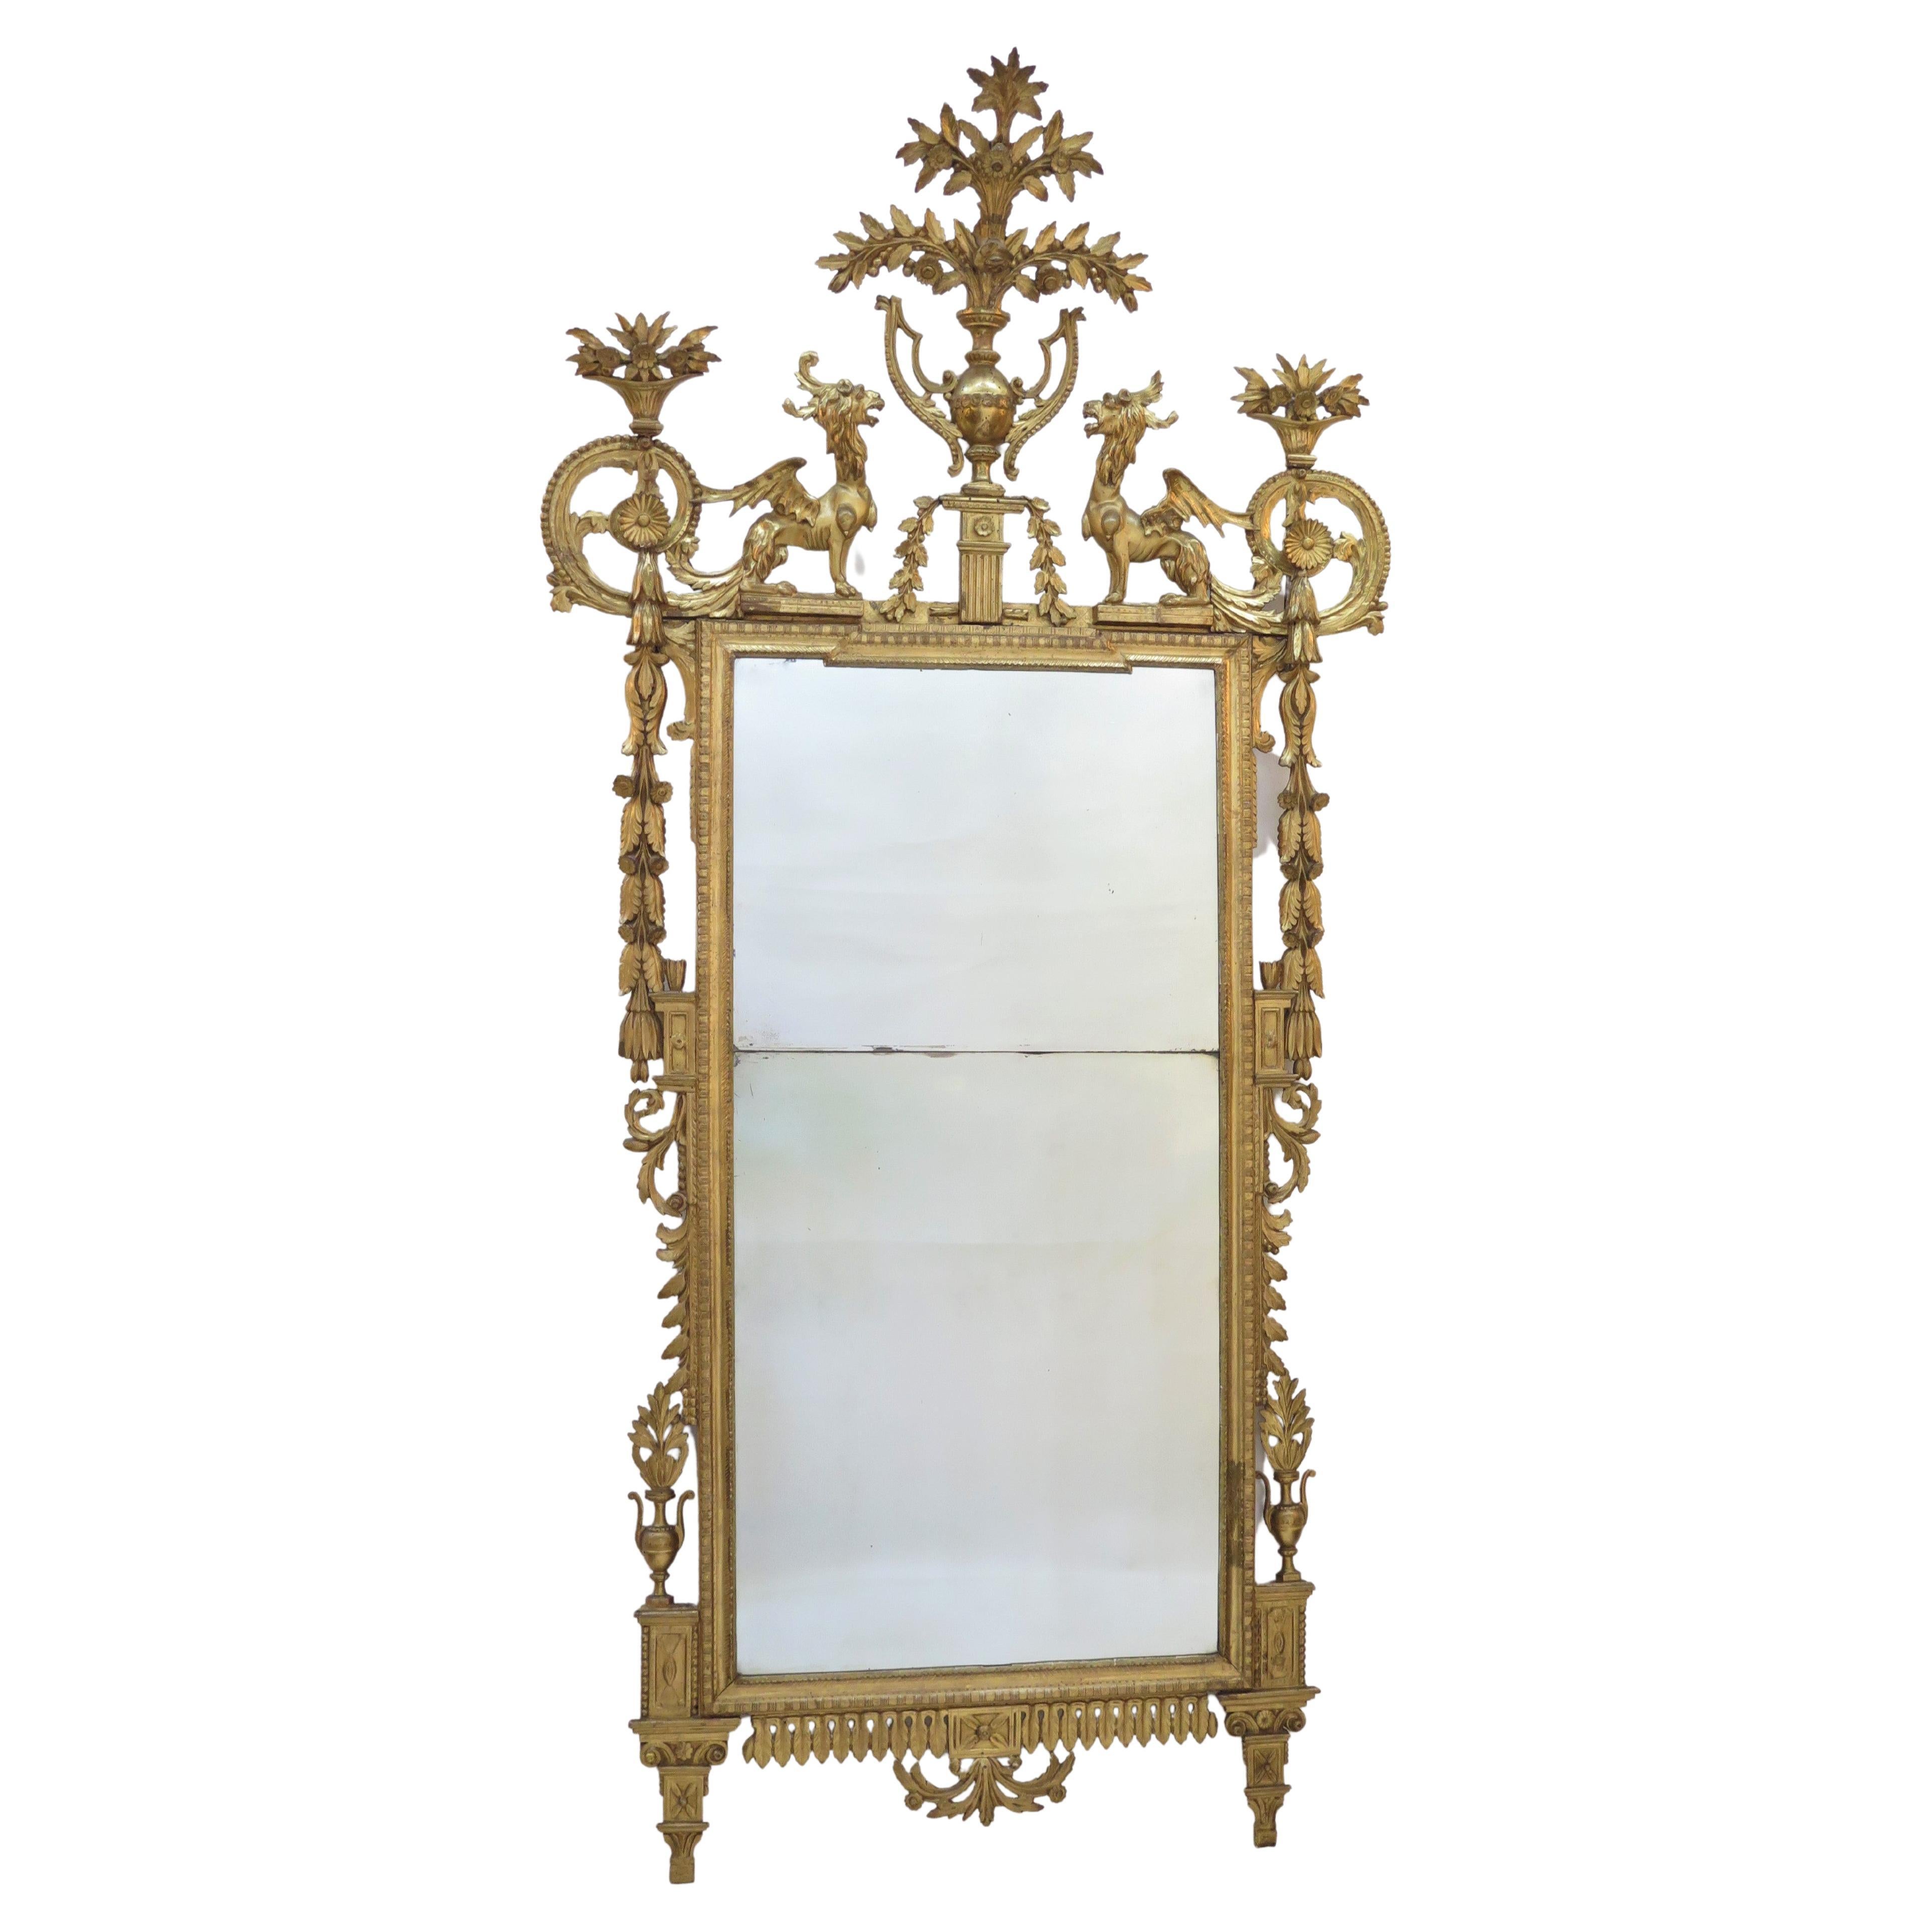 a fine 18th century Italian Neoclassical giltwood mirror / pier glass having a large center urn with floral bouquets, flanked by winged beasts, carved foliate motifs throughout, molded trim, encasing sectioned flat mirror plates, tapered feet, some